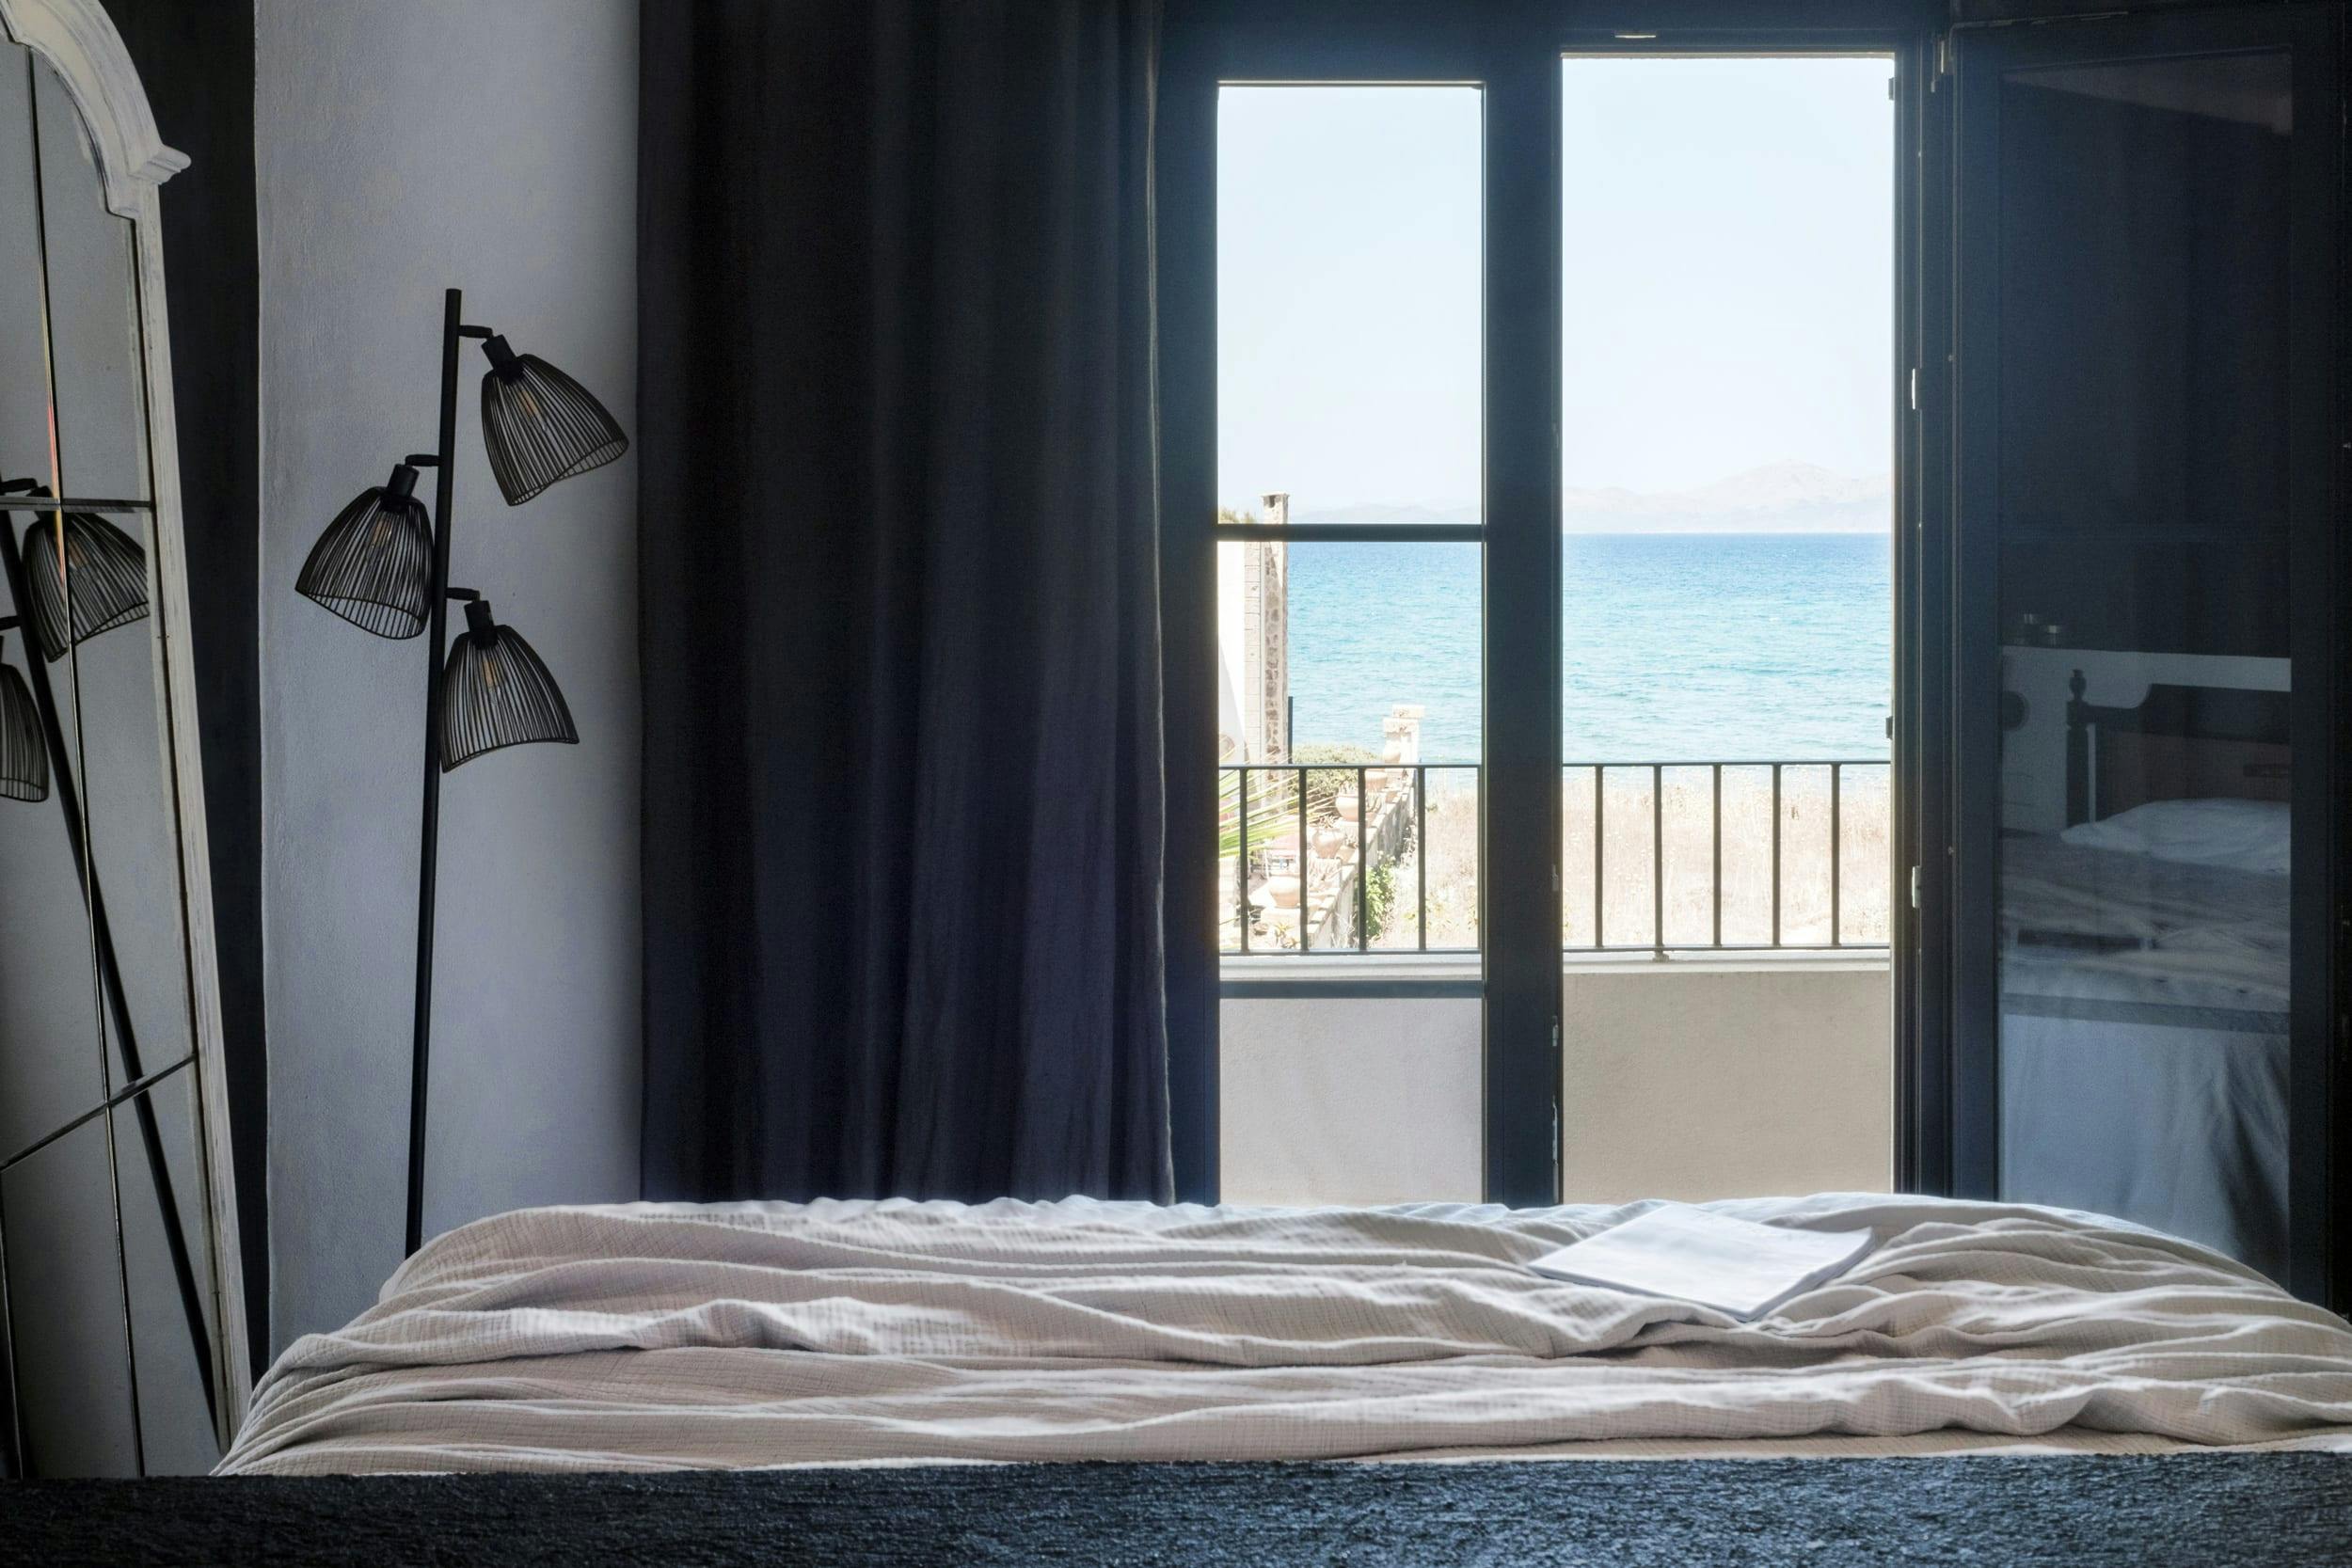 The image features a neatly made bed with a white comforter and a blue blanket, situated next to a large window overlooking the ocean.